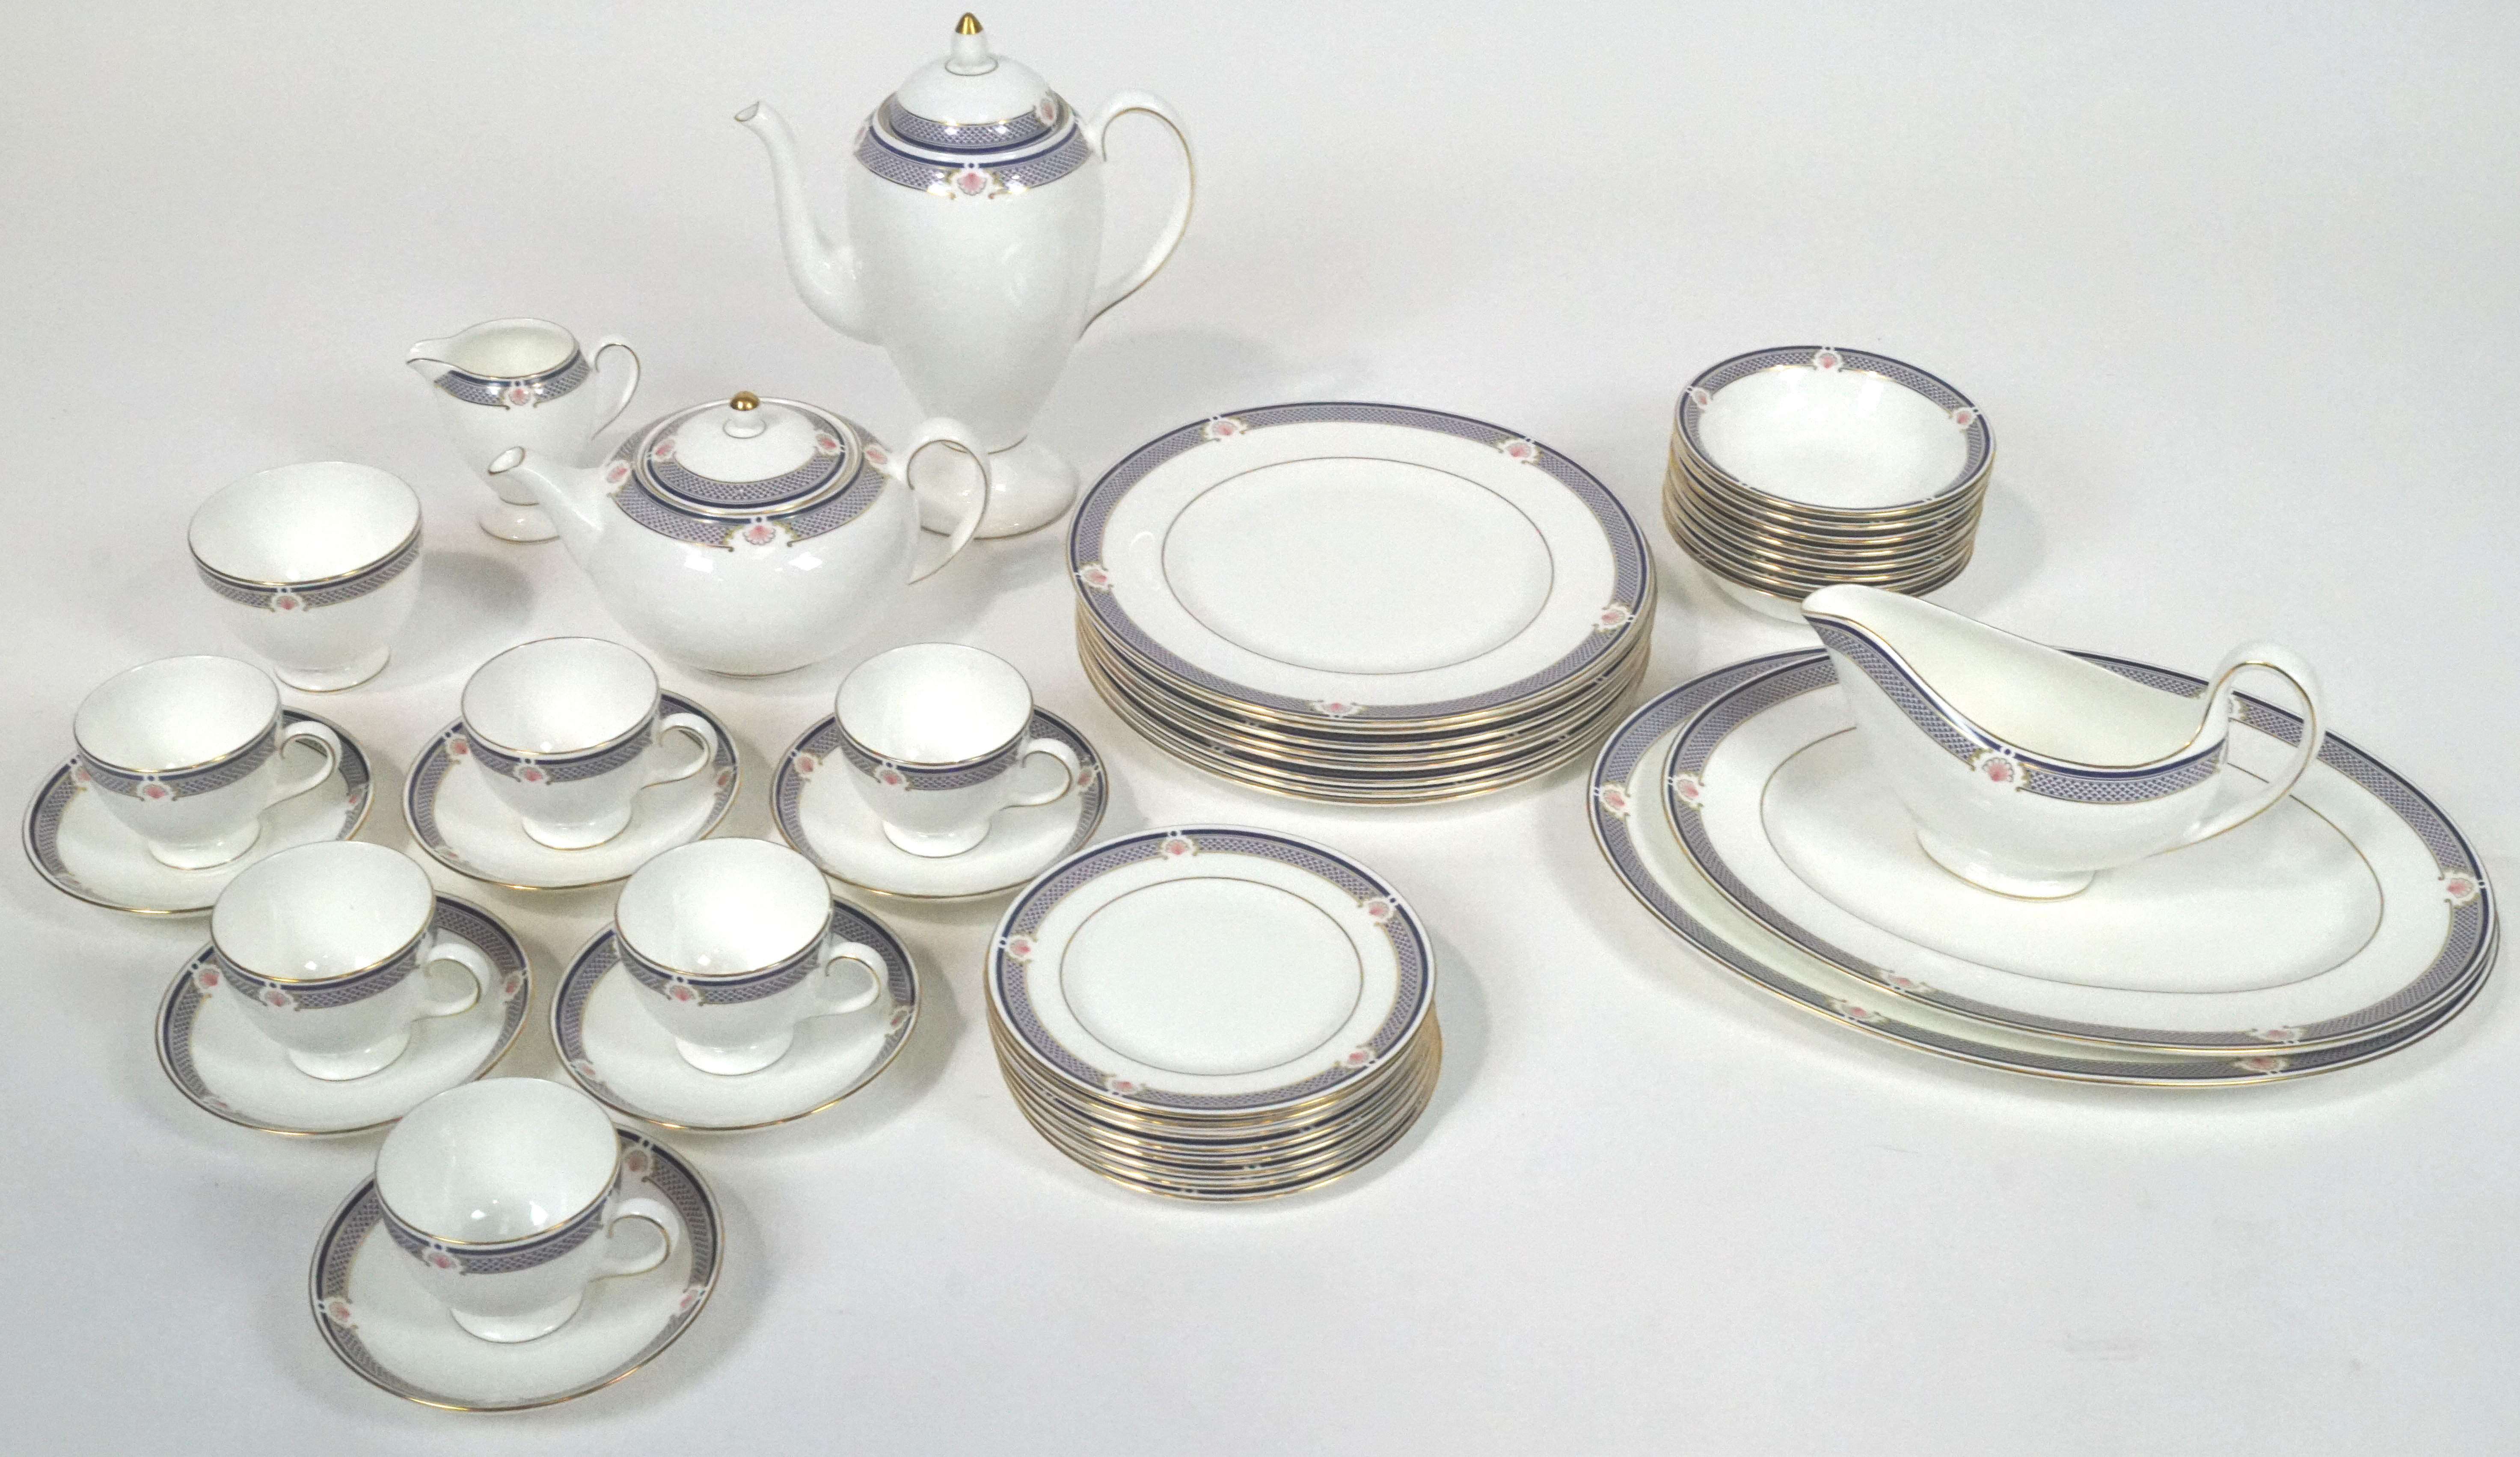 A Wedgwood 'Waverley' pattern tea and dinner service for six place settings